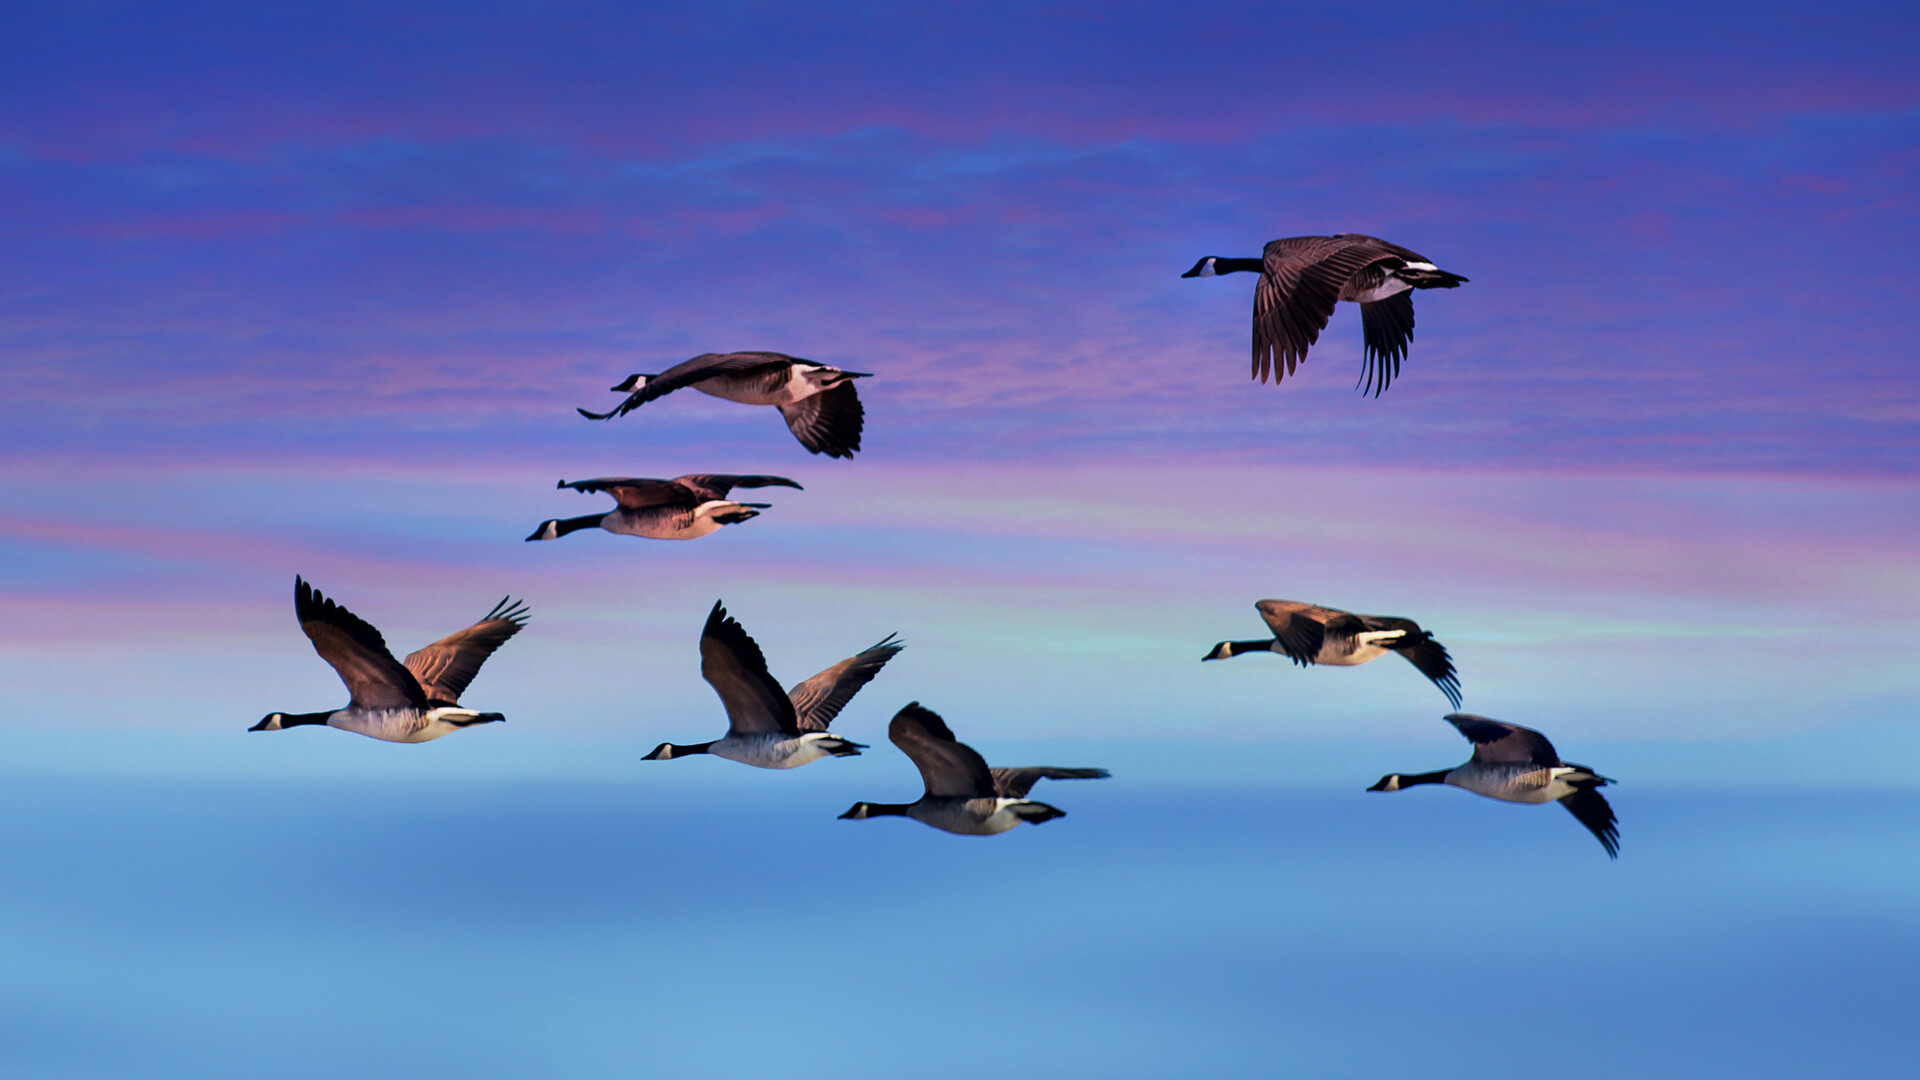 Geese: A large water bird similar to a duck but larger, The male bird is called a gander. 1920x1080 Full HD Wallpaper.